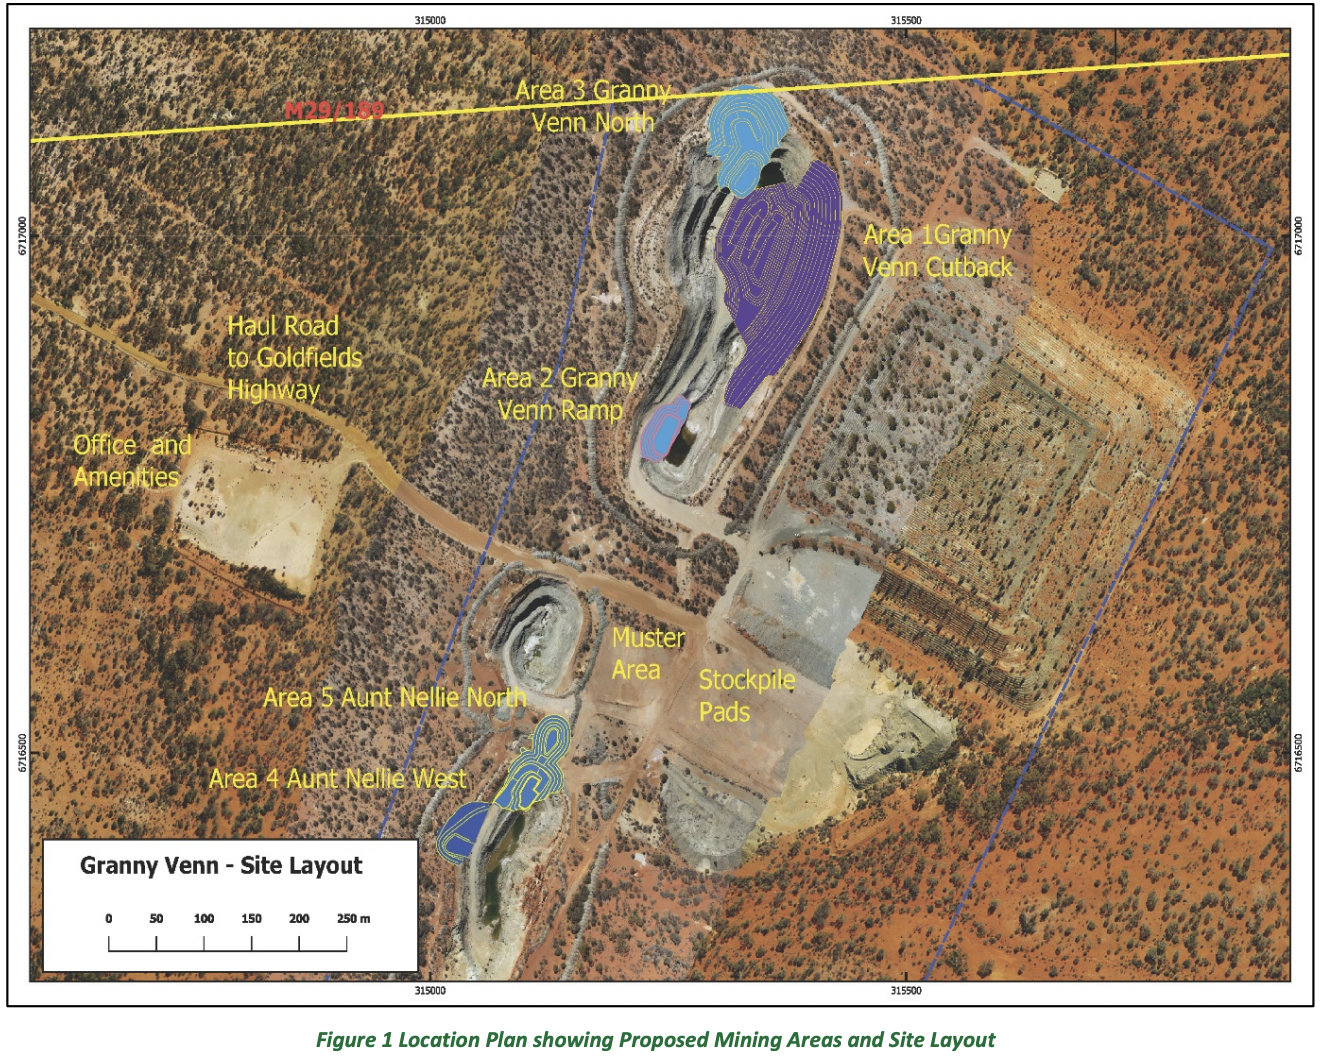 Figure 1 Location Plan showing Proposed Mining Areas and Site Layout